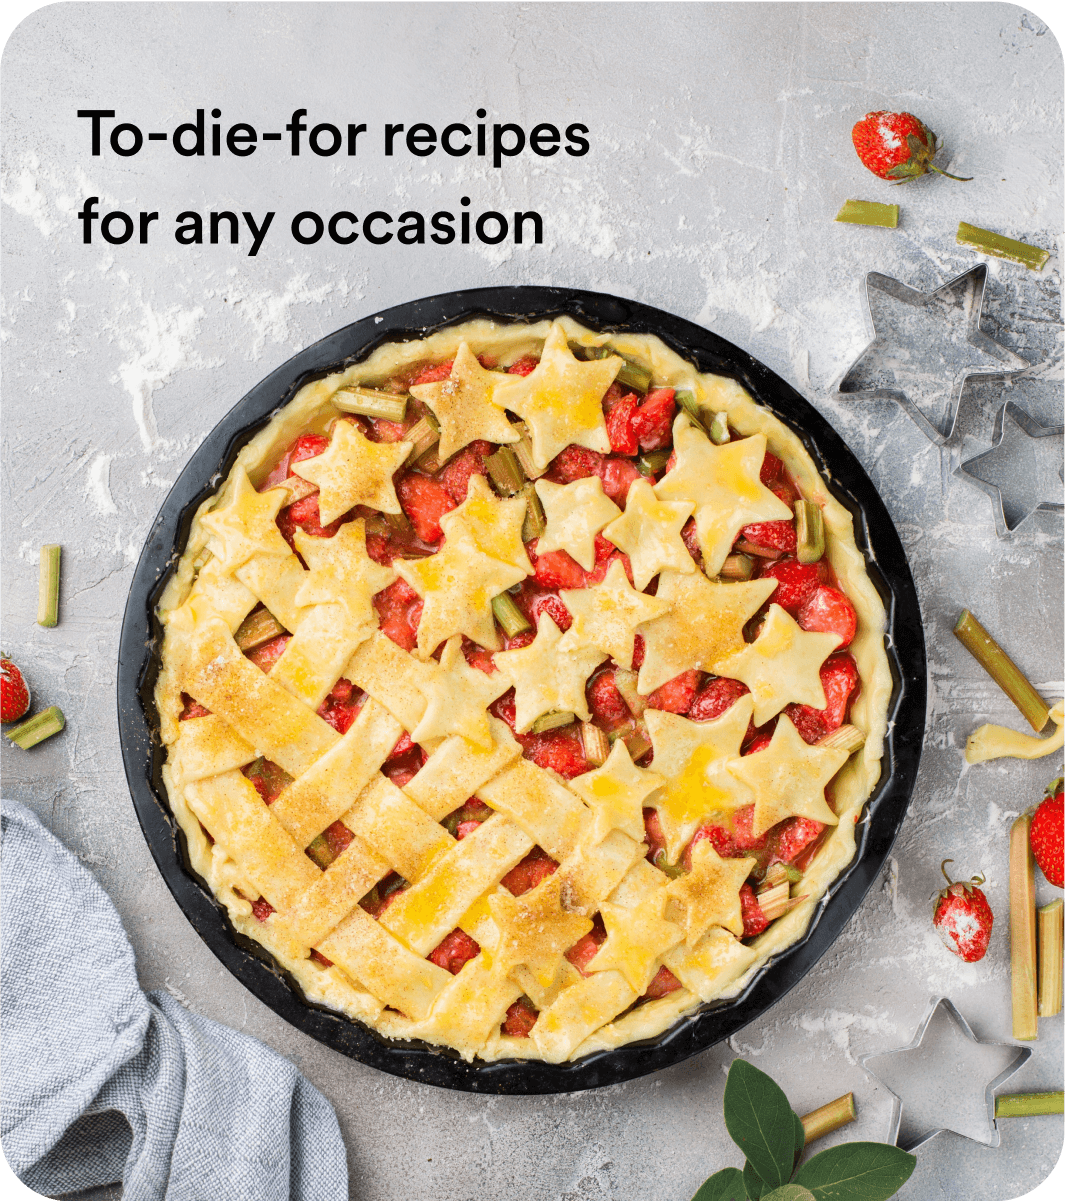 To-die-for recipes for any occasion